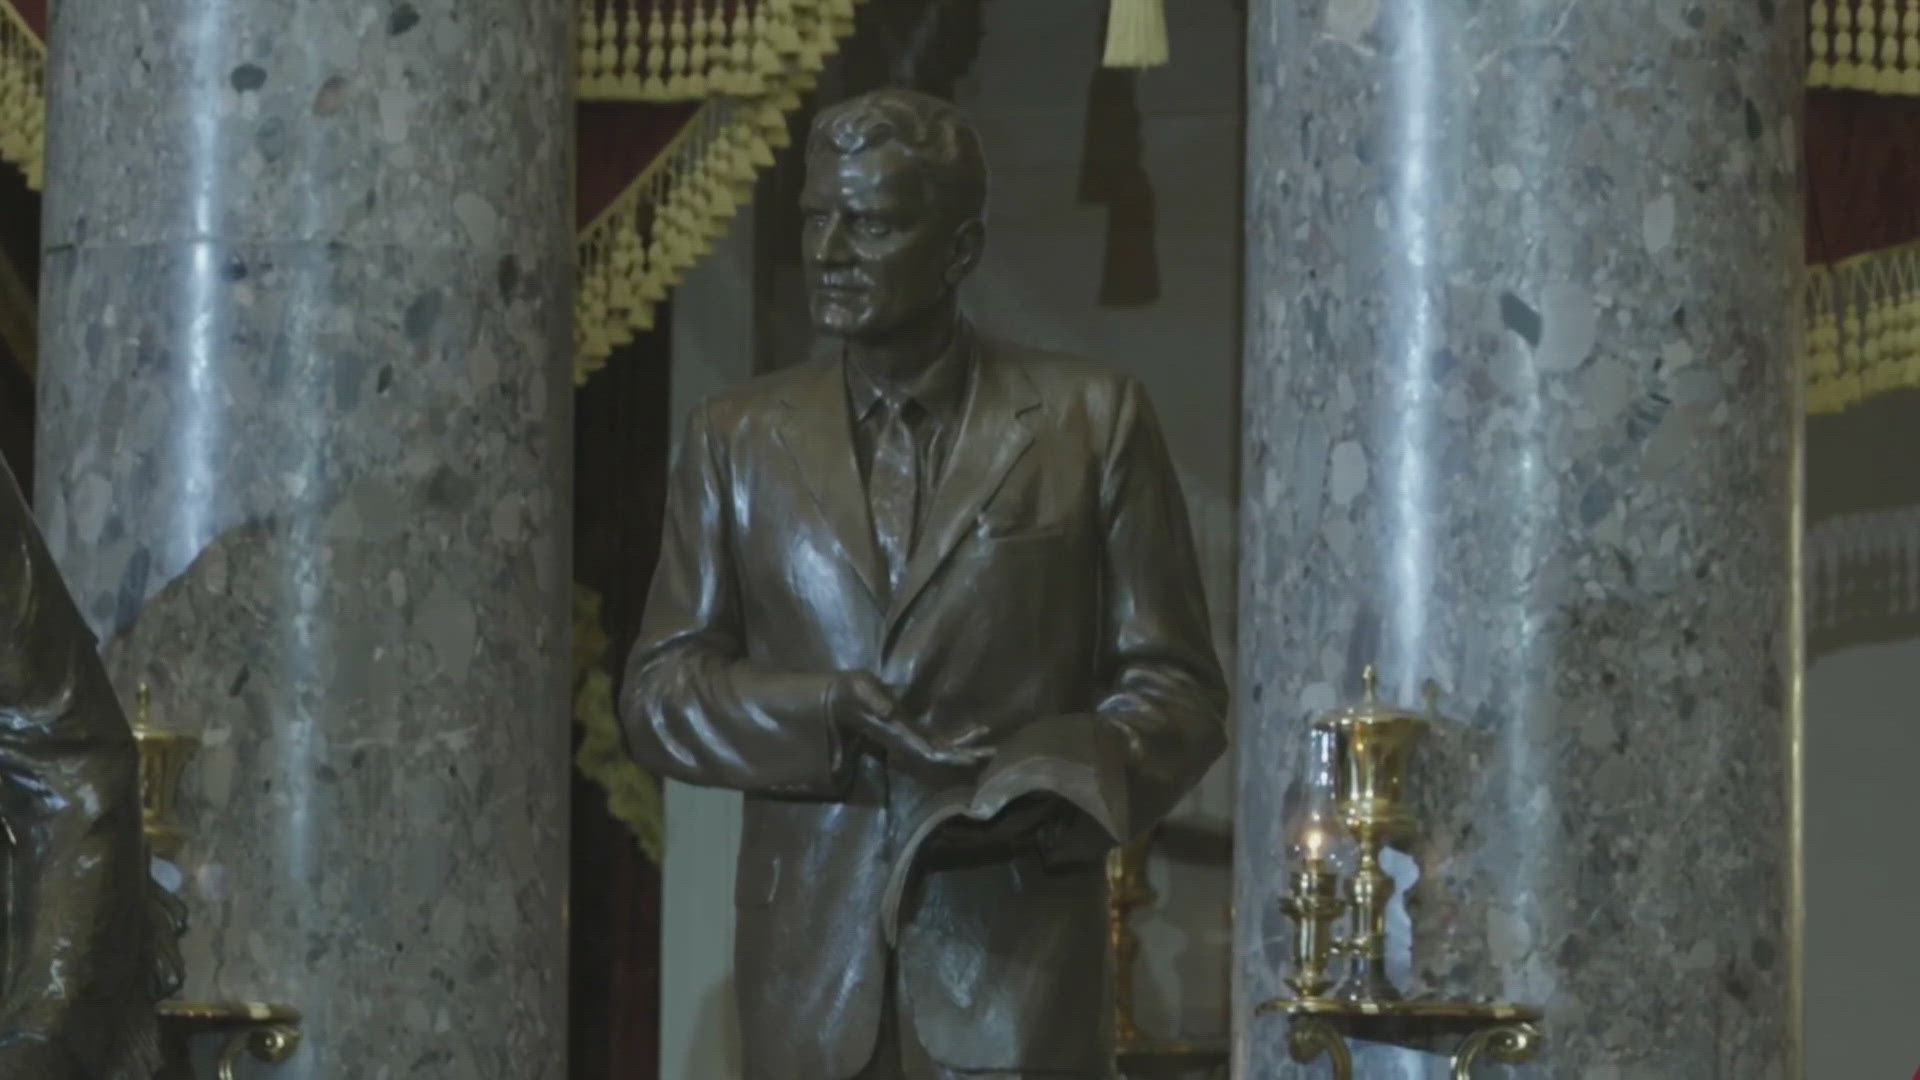 Officials say the statue of the late reverend Billy Graham represents what North Carolina stands for.